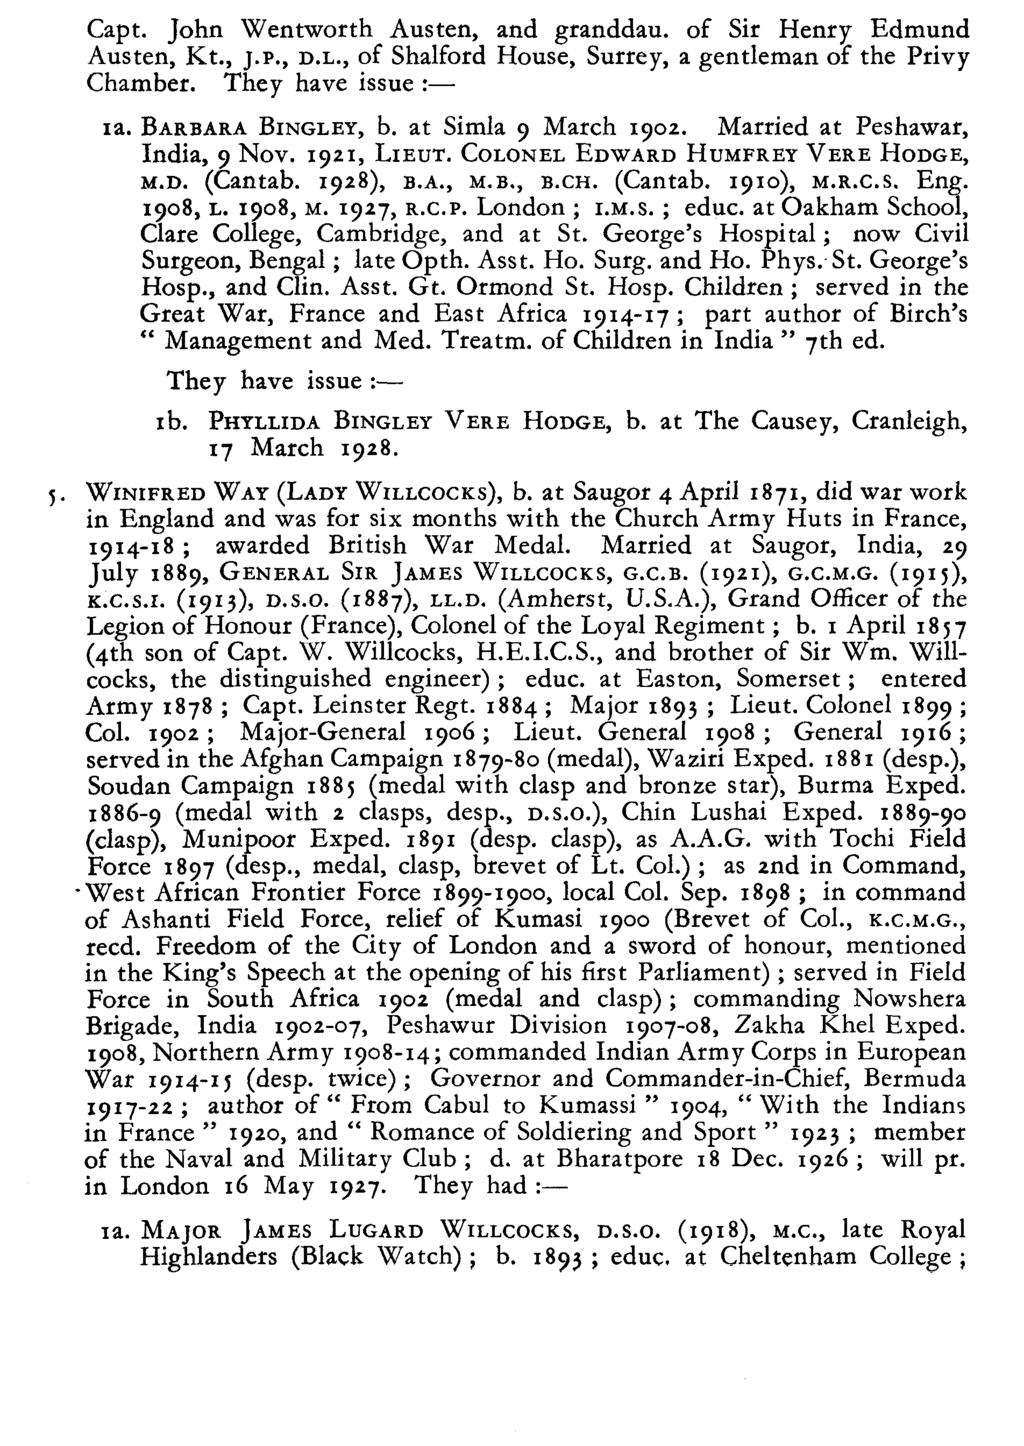 Capt. John Wentworth Austen, and granddau. of Sir Henry Edmund Austen, Kt., J.P., D.L., of Shalford House, Surrey, a gentleman of the Privy Chamber. They have issue :- a. BARBARA BNGLEY, b.